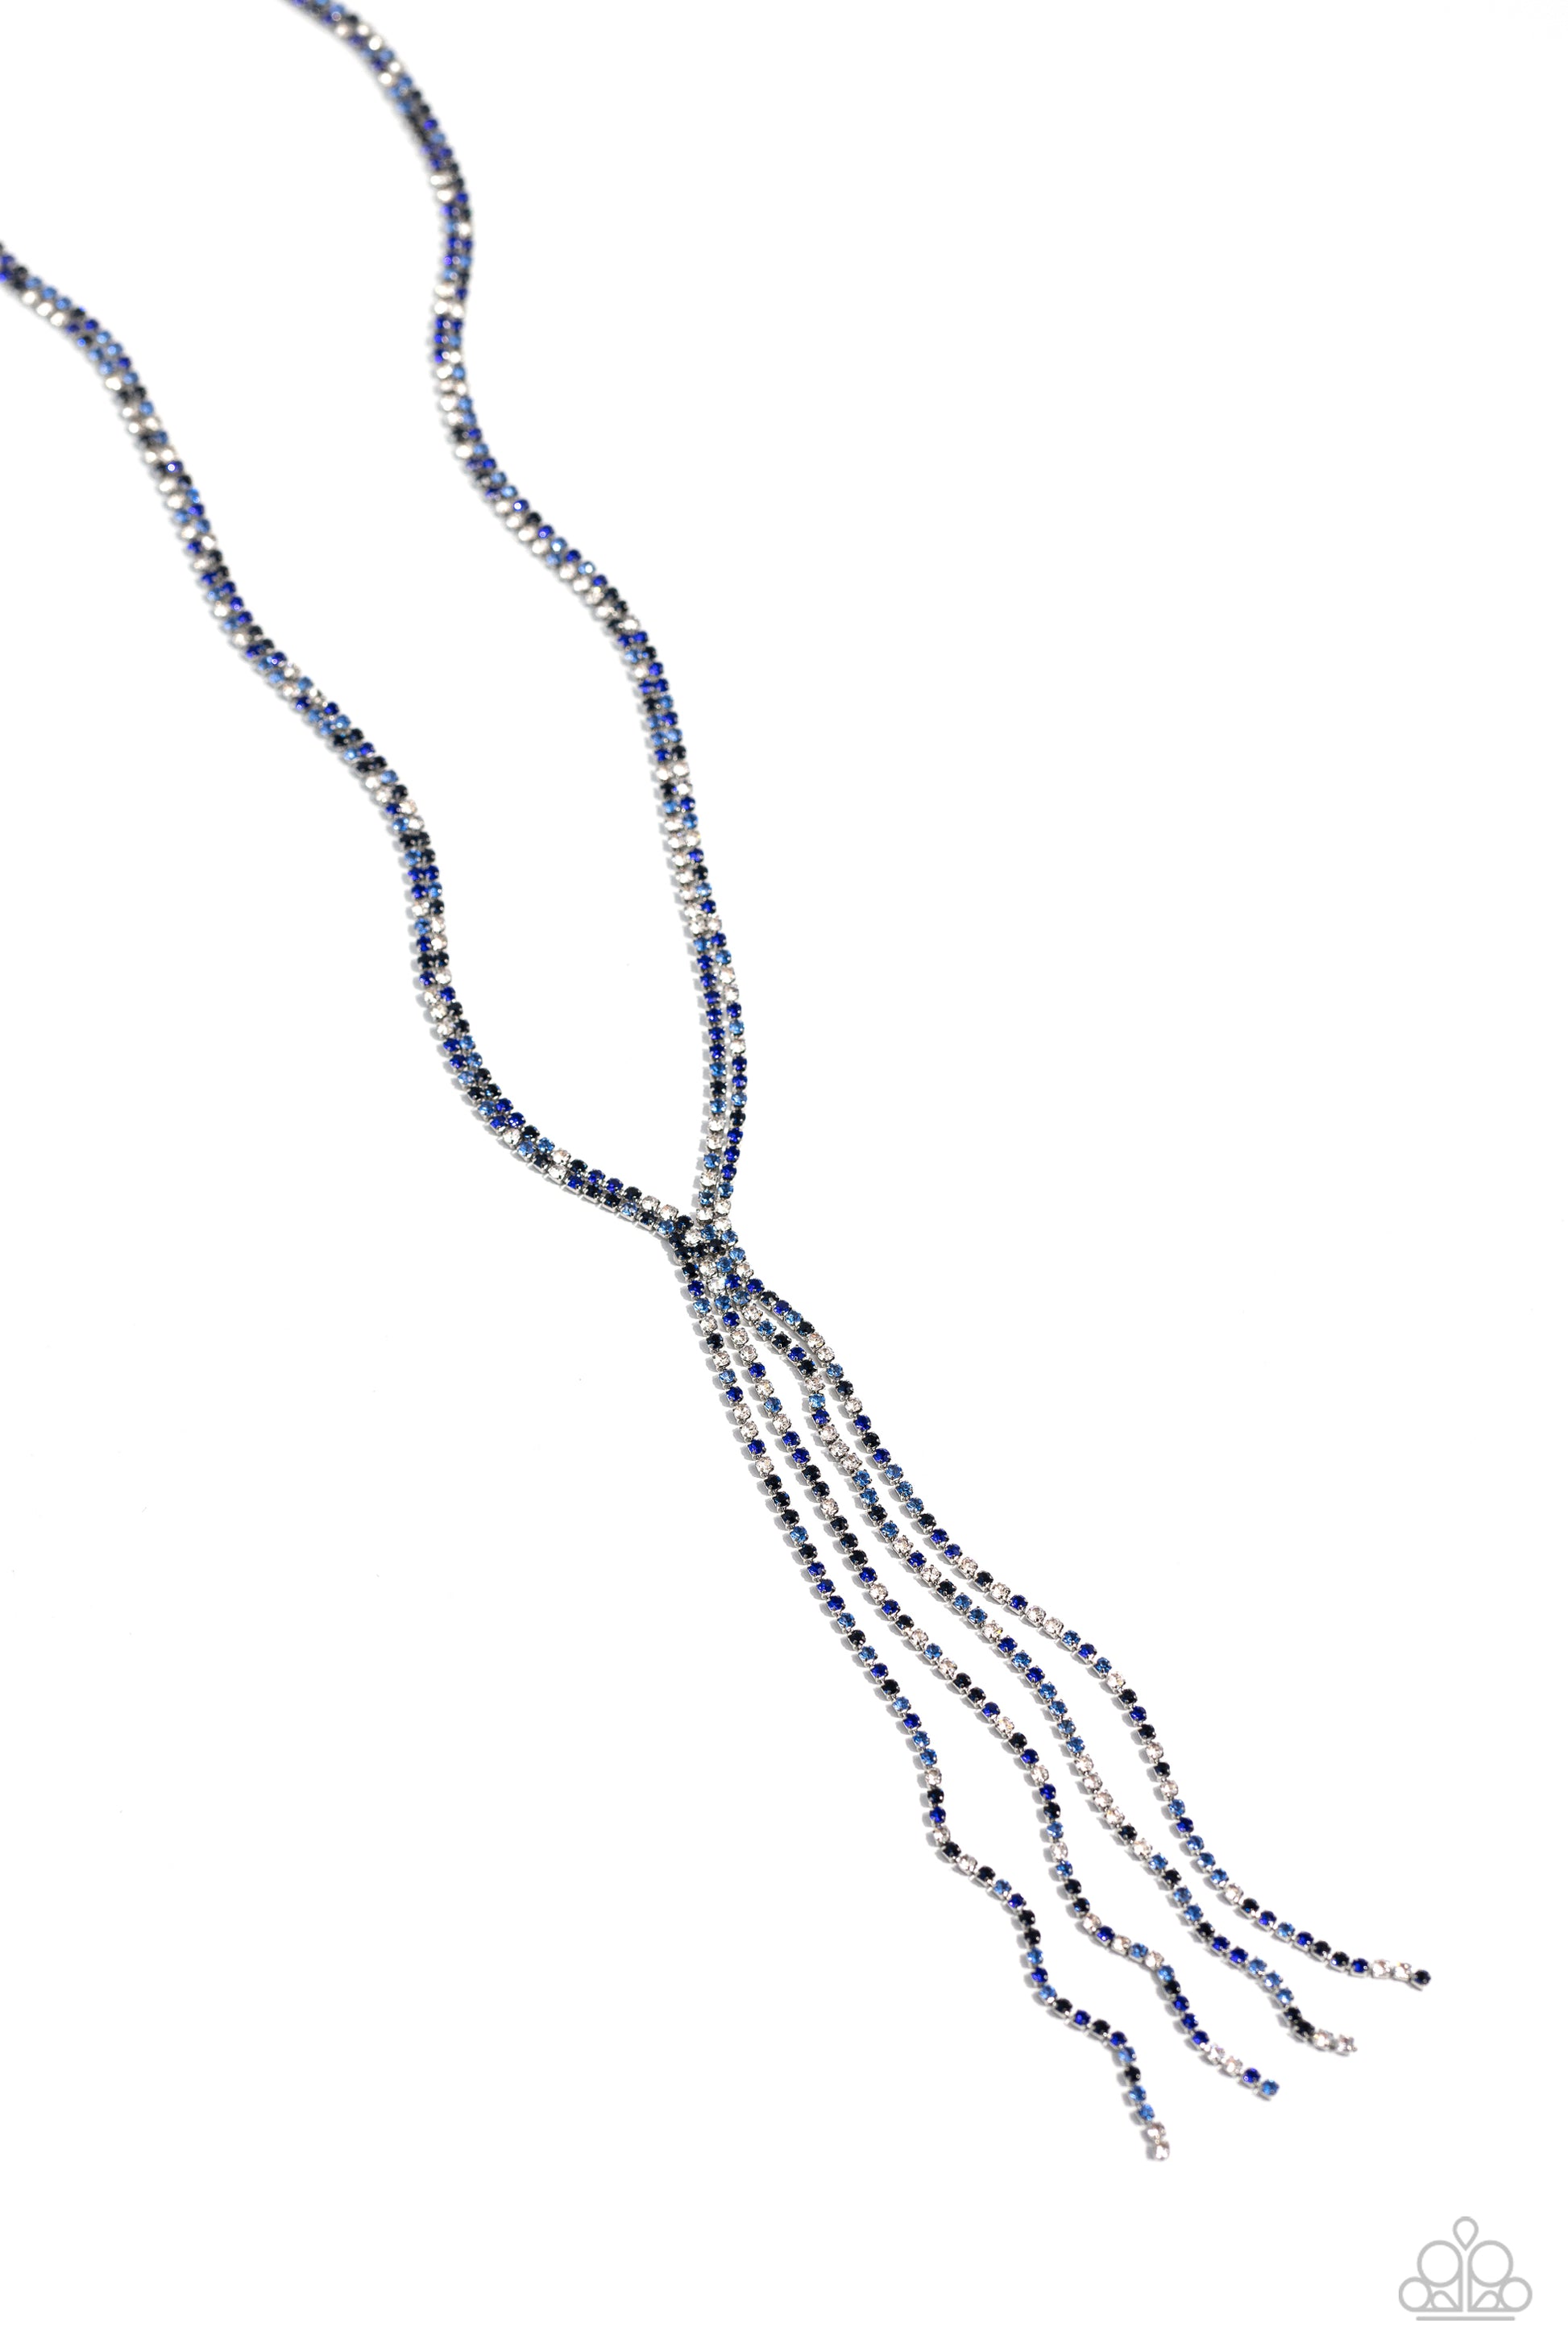 Featuring sleek square fittings, two strands of glittery, dainty multicolored blue rhinestones connect down the chest for a refined centerpiece. The interconnected rows delicately give way to freefalling multicolored blue layers, creating additional strands of glitzy movement. Features an adjustable clasp closure.  Sold as one individual necklace. Includes one pair of matching earrings.